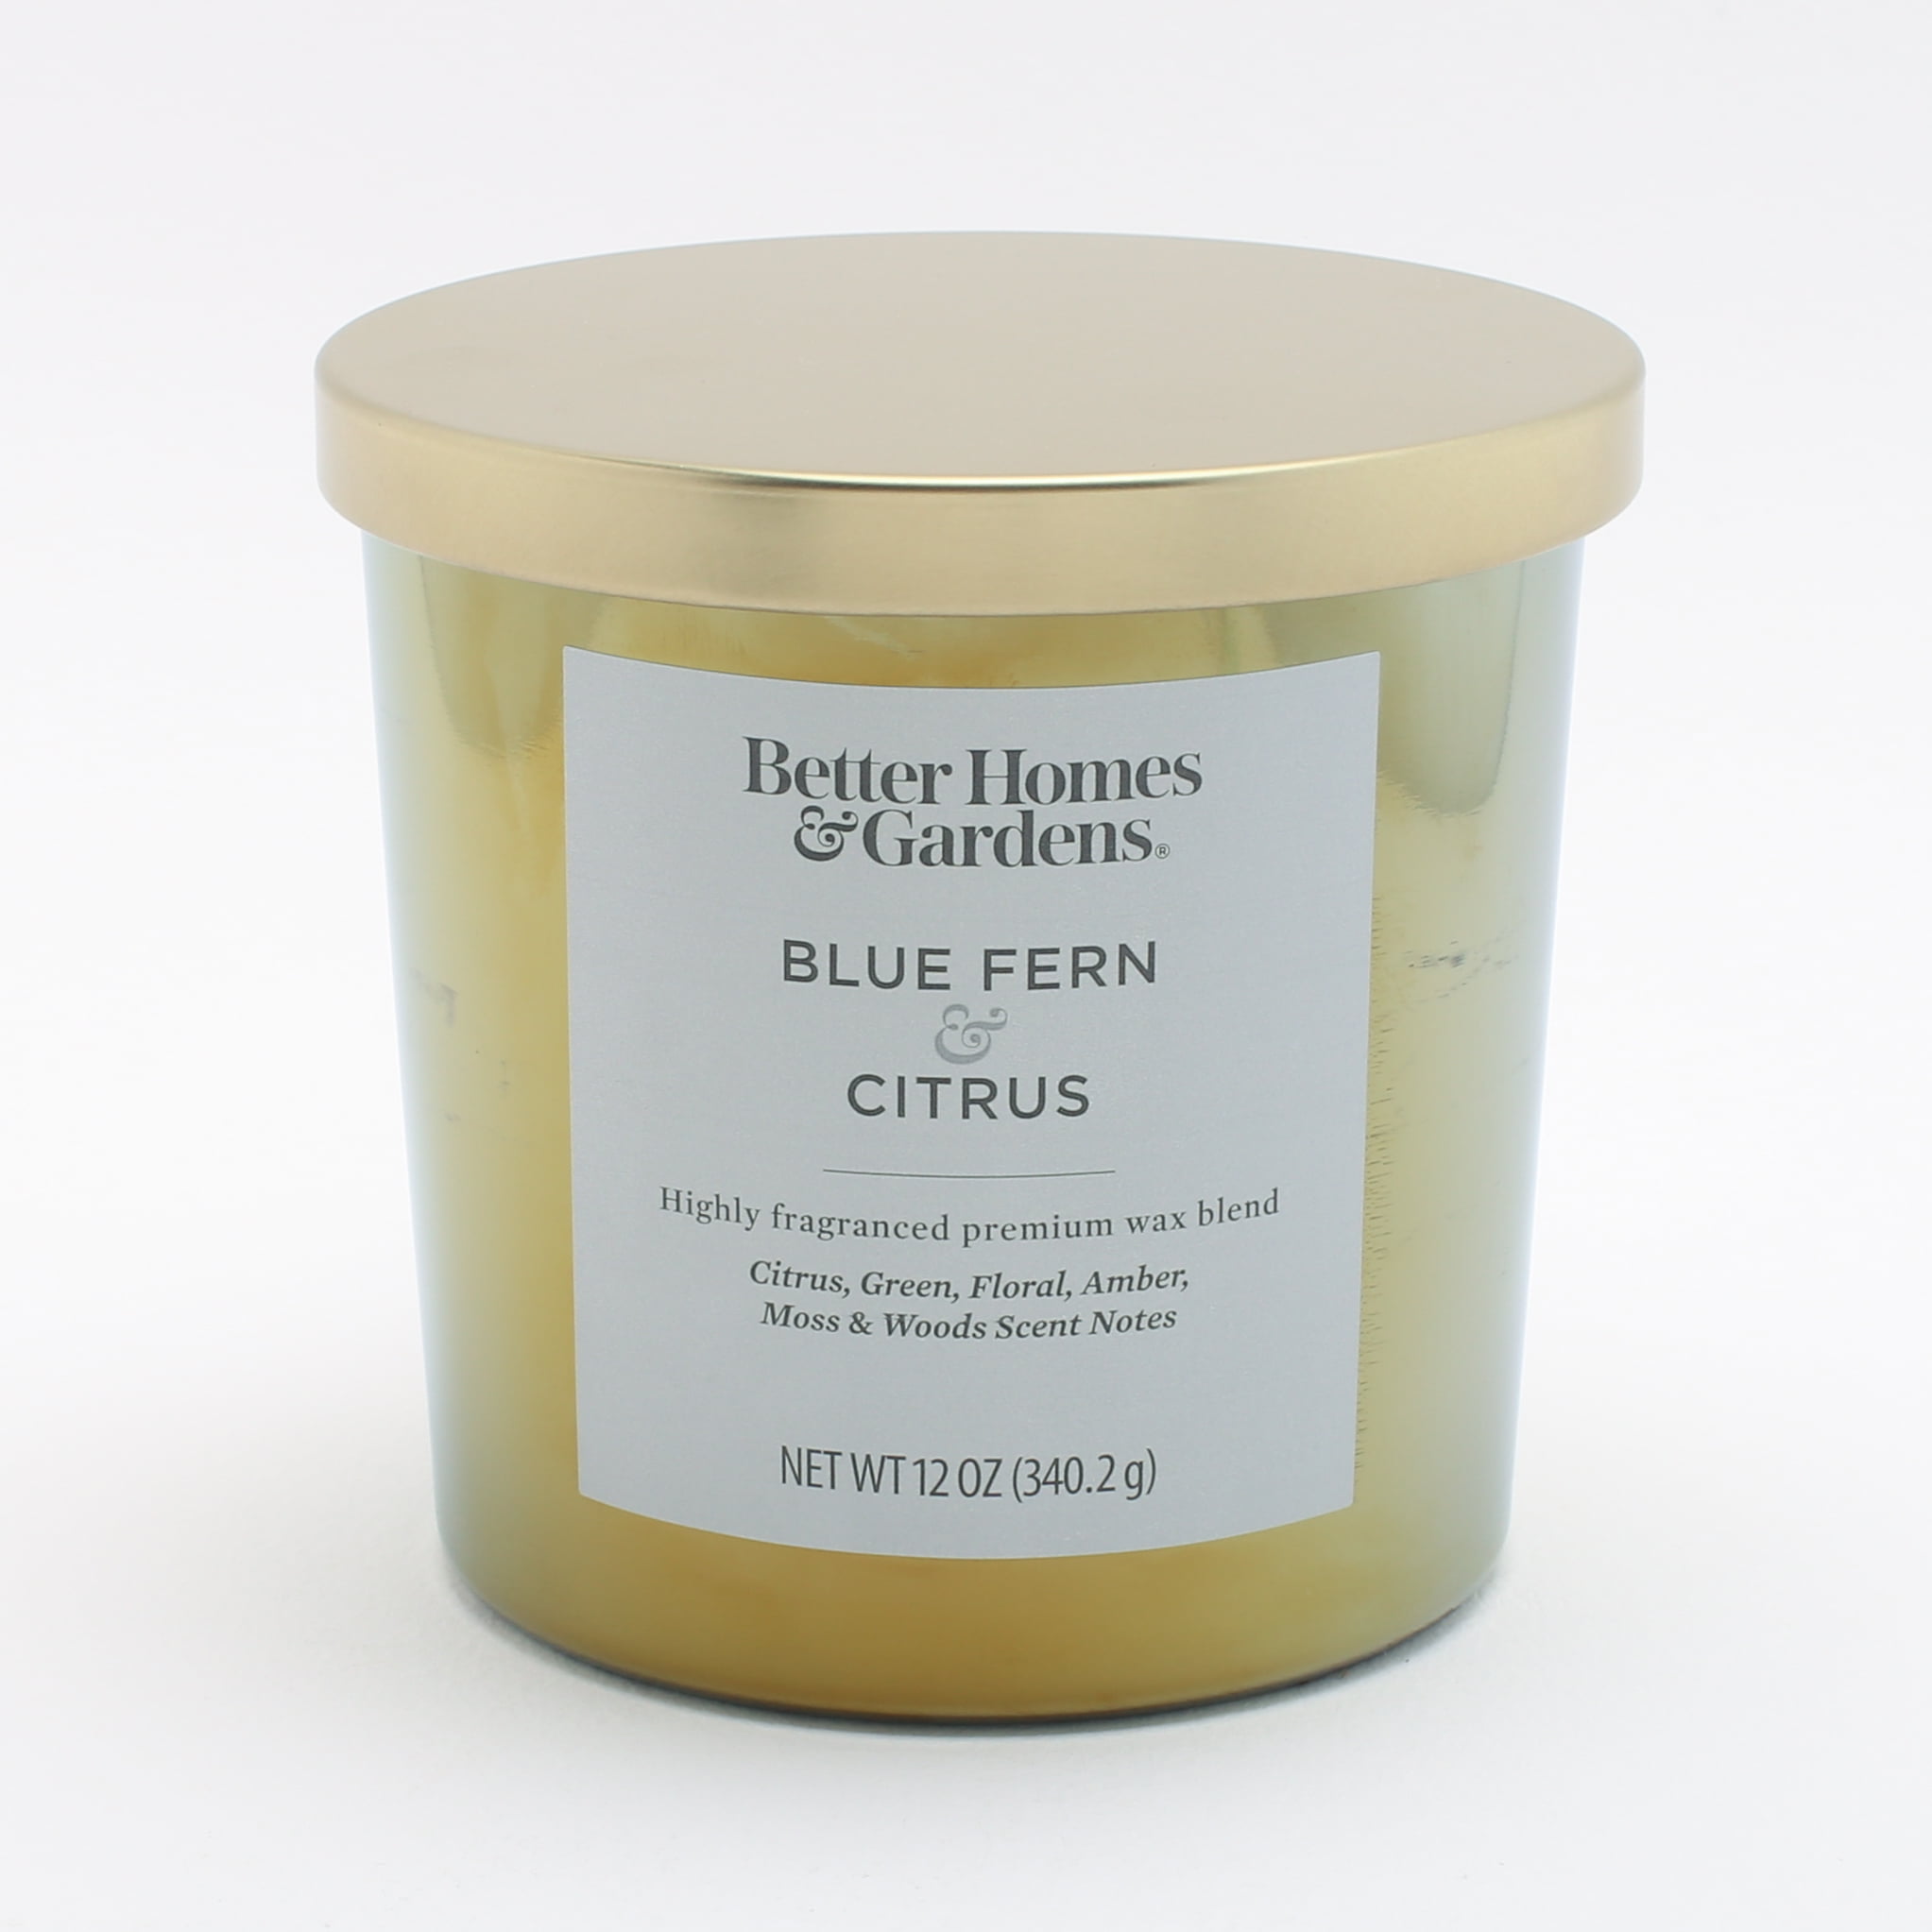 Better Homes & Gardens 12oz Blue Fern & Citrus Scented Iridescent Single-Wick Jar candle